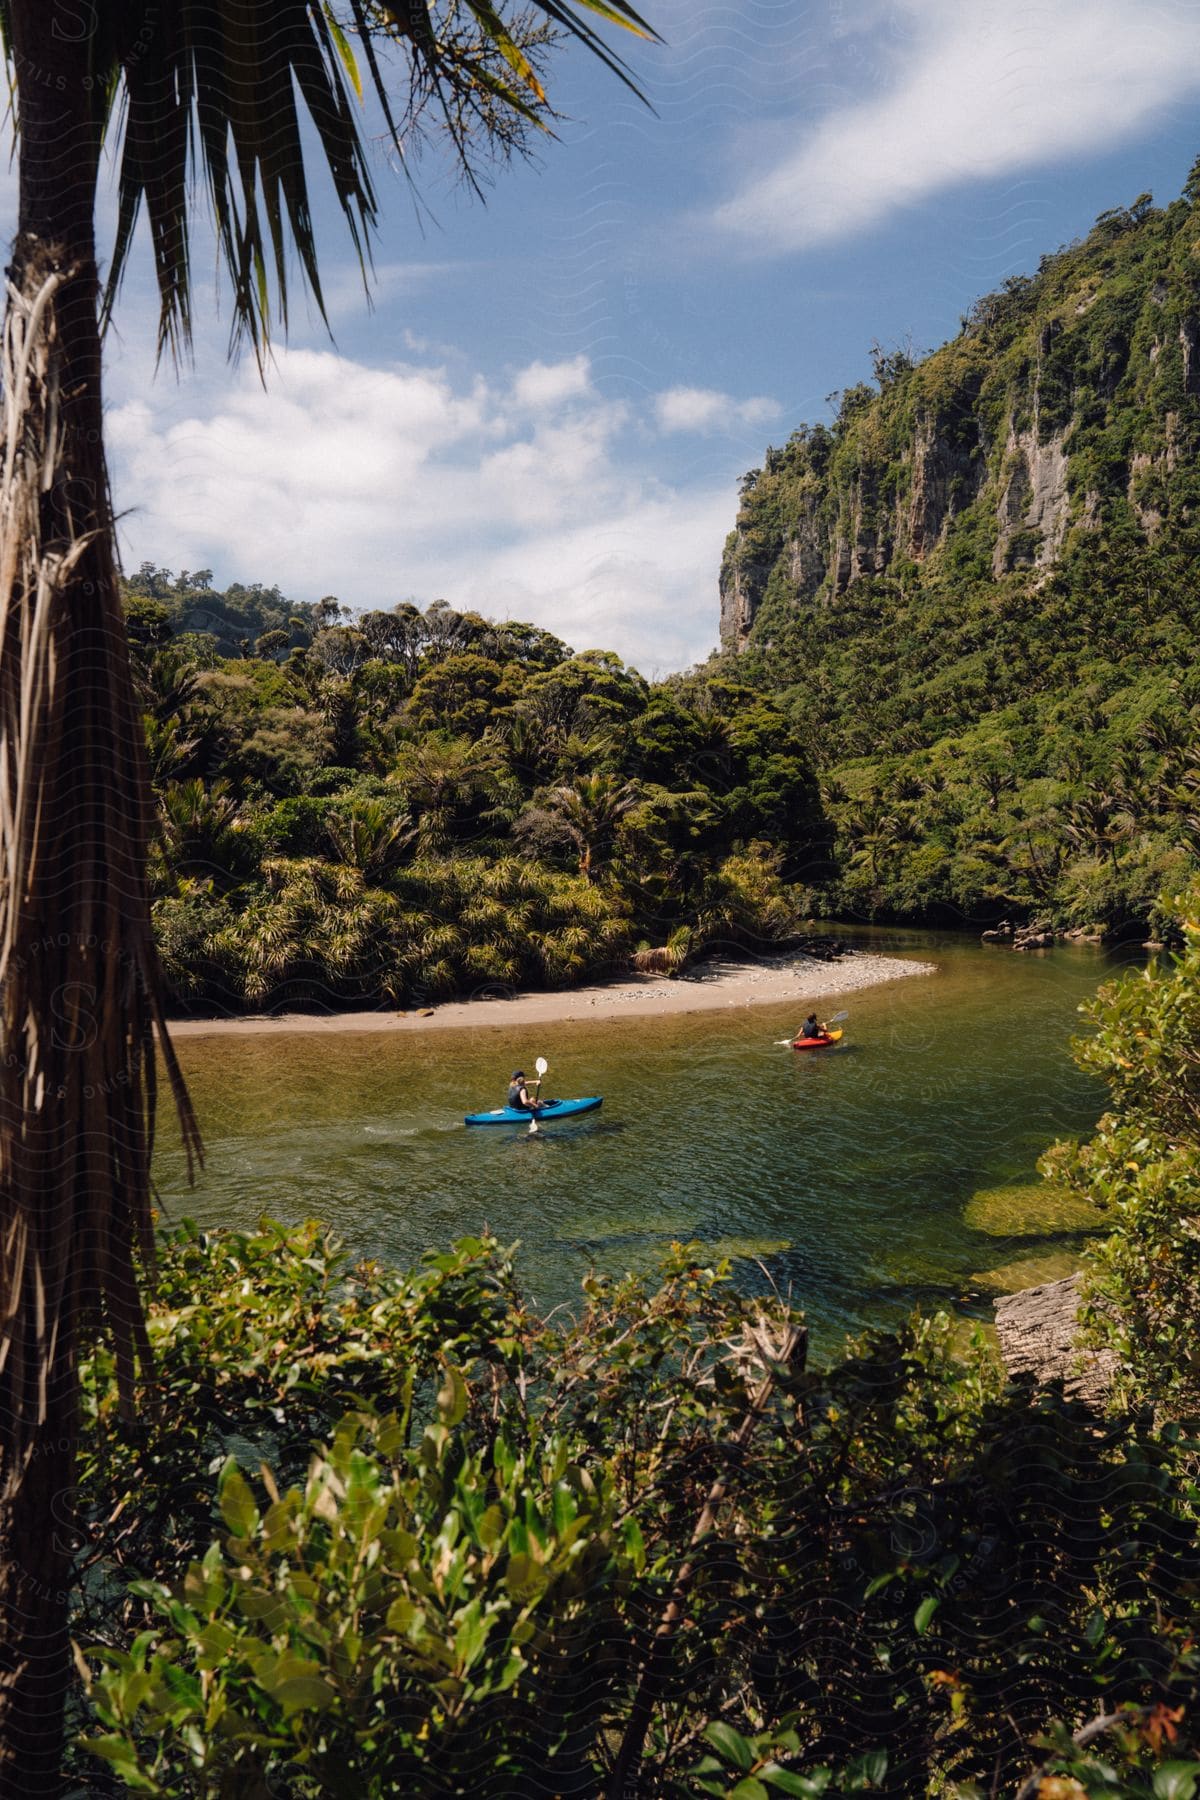 Two individuals are canoeing through the water near a tropical beach, with a high rocky cliff visible in the distance.